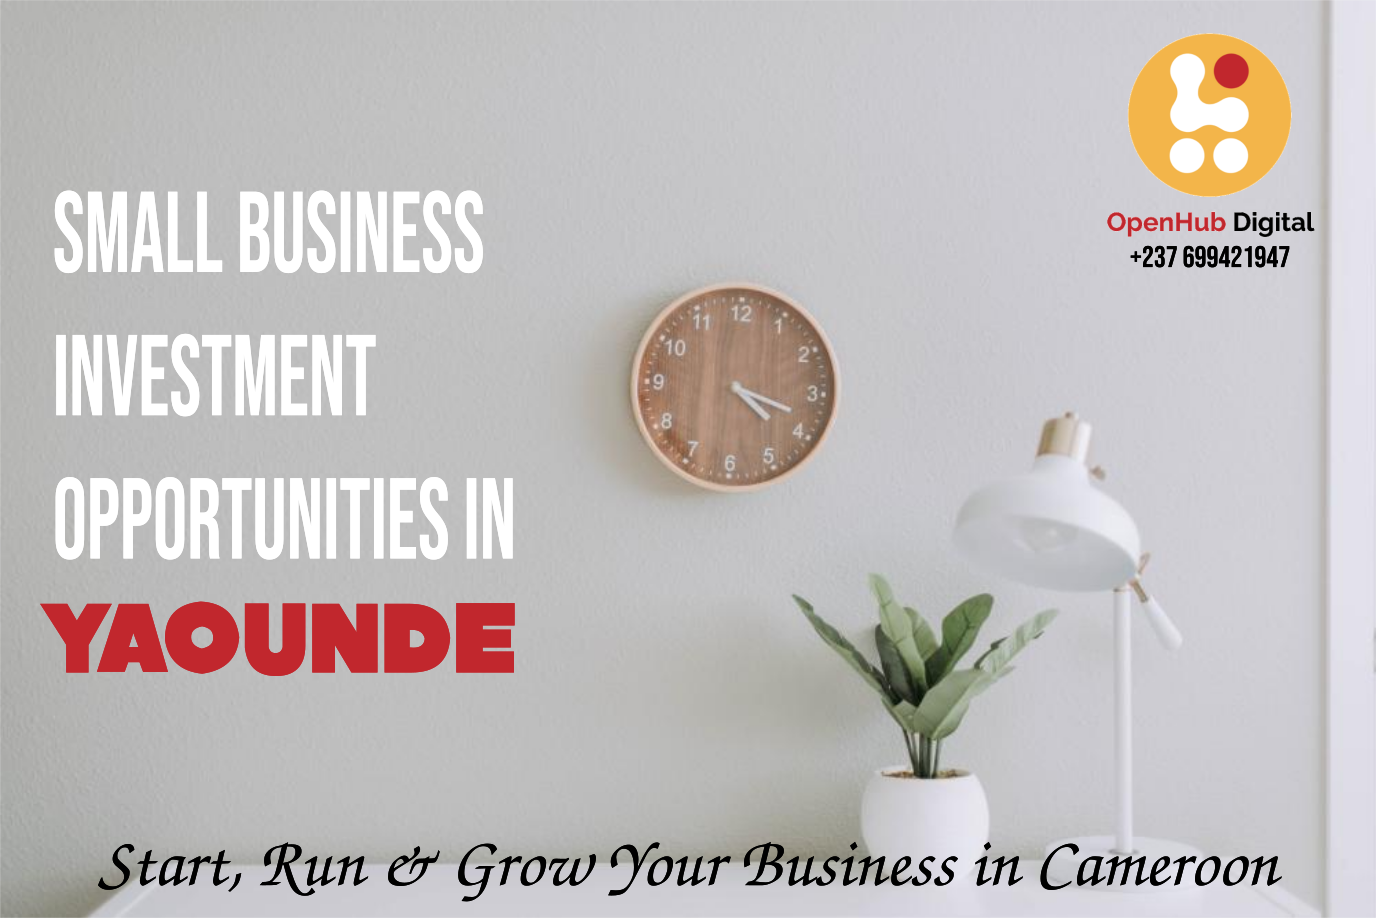 Small Business Investment Opportunities in Yaounde